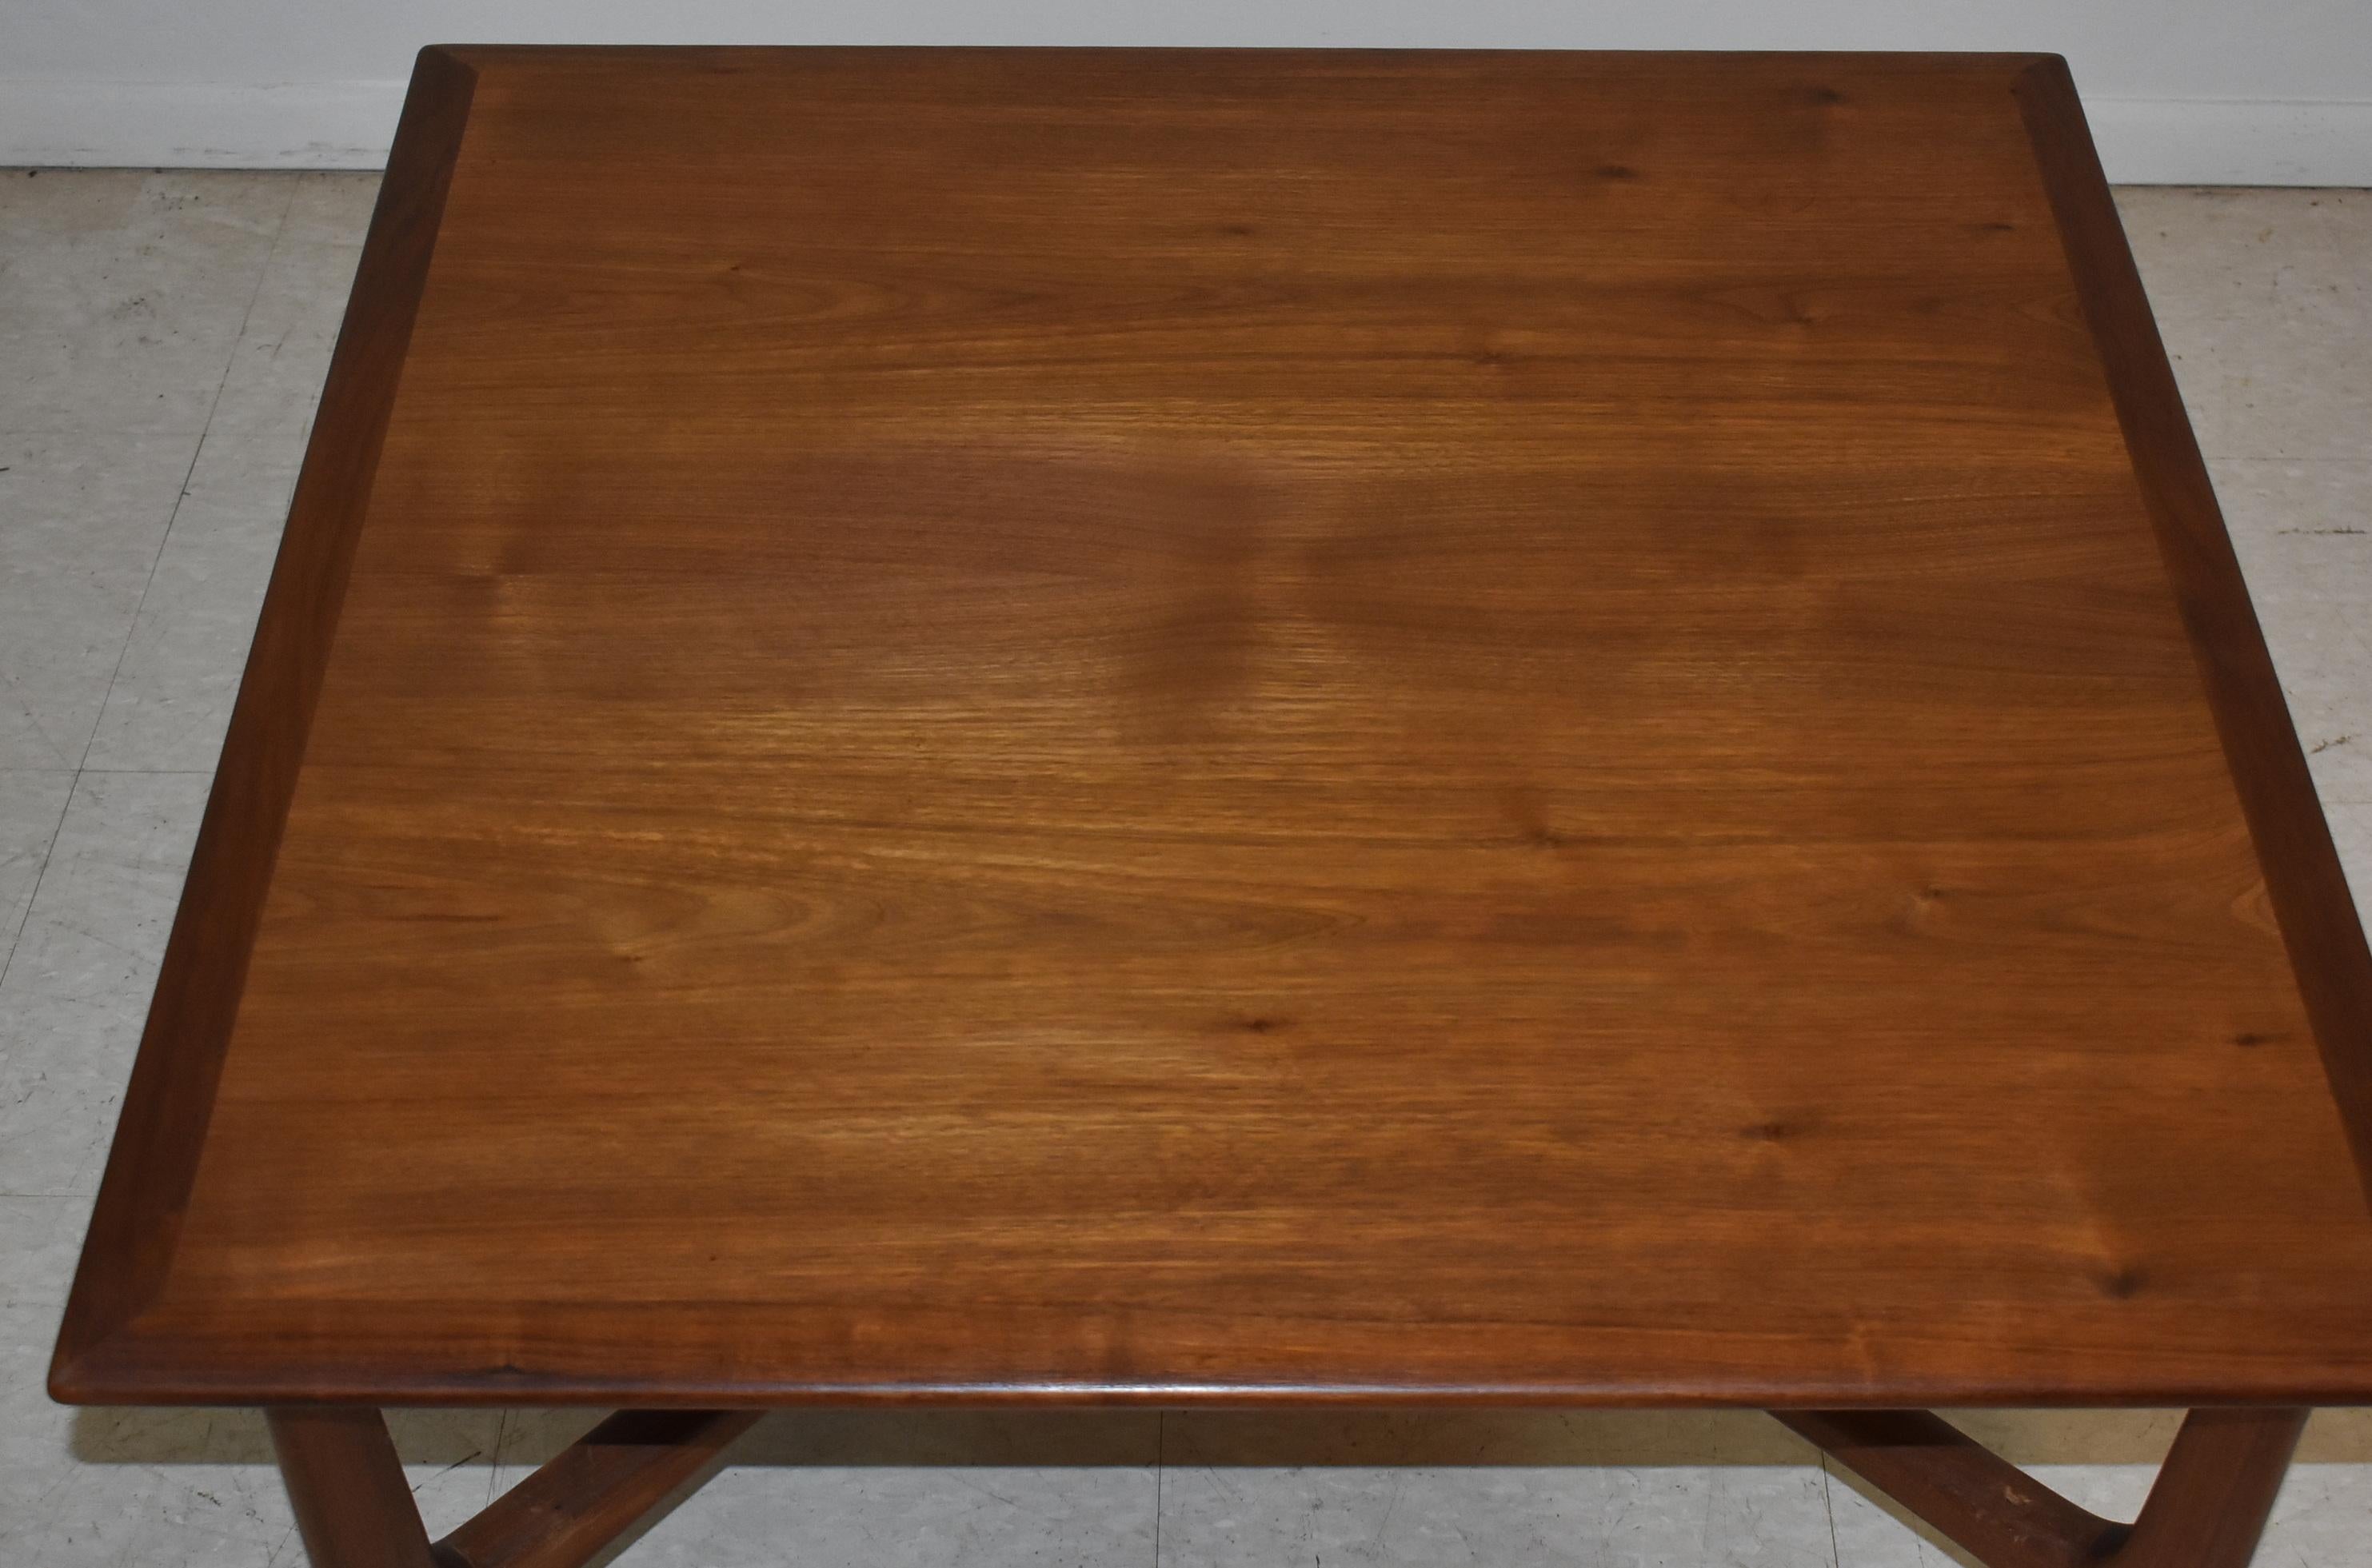 Modern Danish teak coffee table, cocktail table, by DUX. Square. Banded edge with X stretcher. Slight damage to 1 leg cross bar as photo'd, faint ring mark on top. Nice condition. Measures: 32